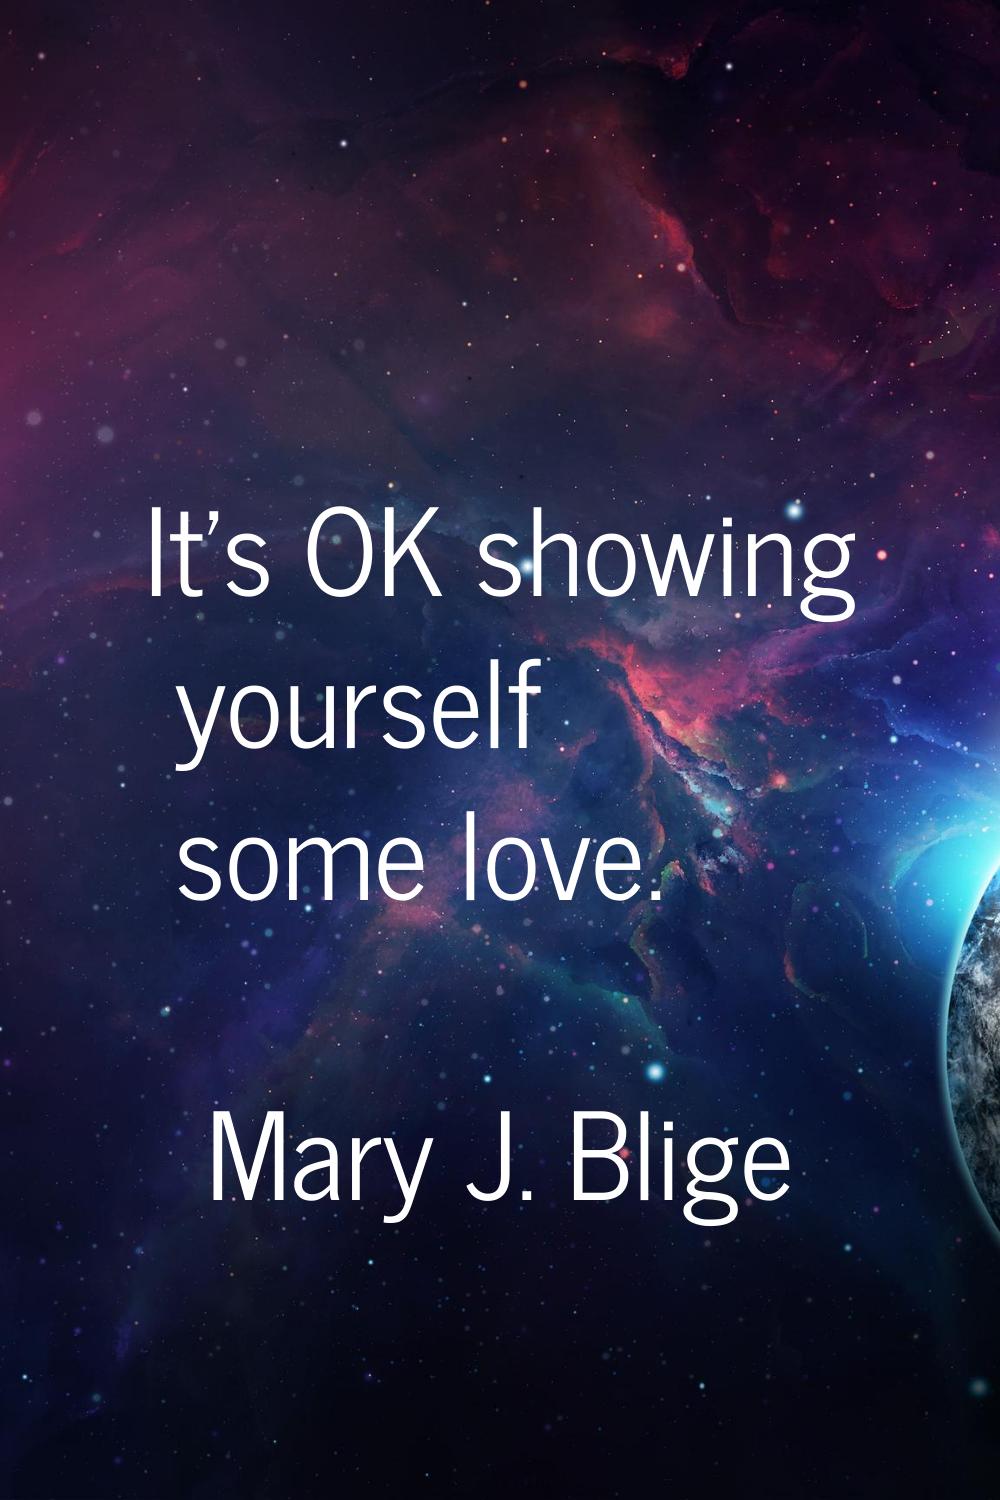 It's OK showing yourself some love.